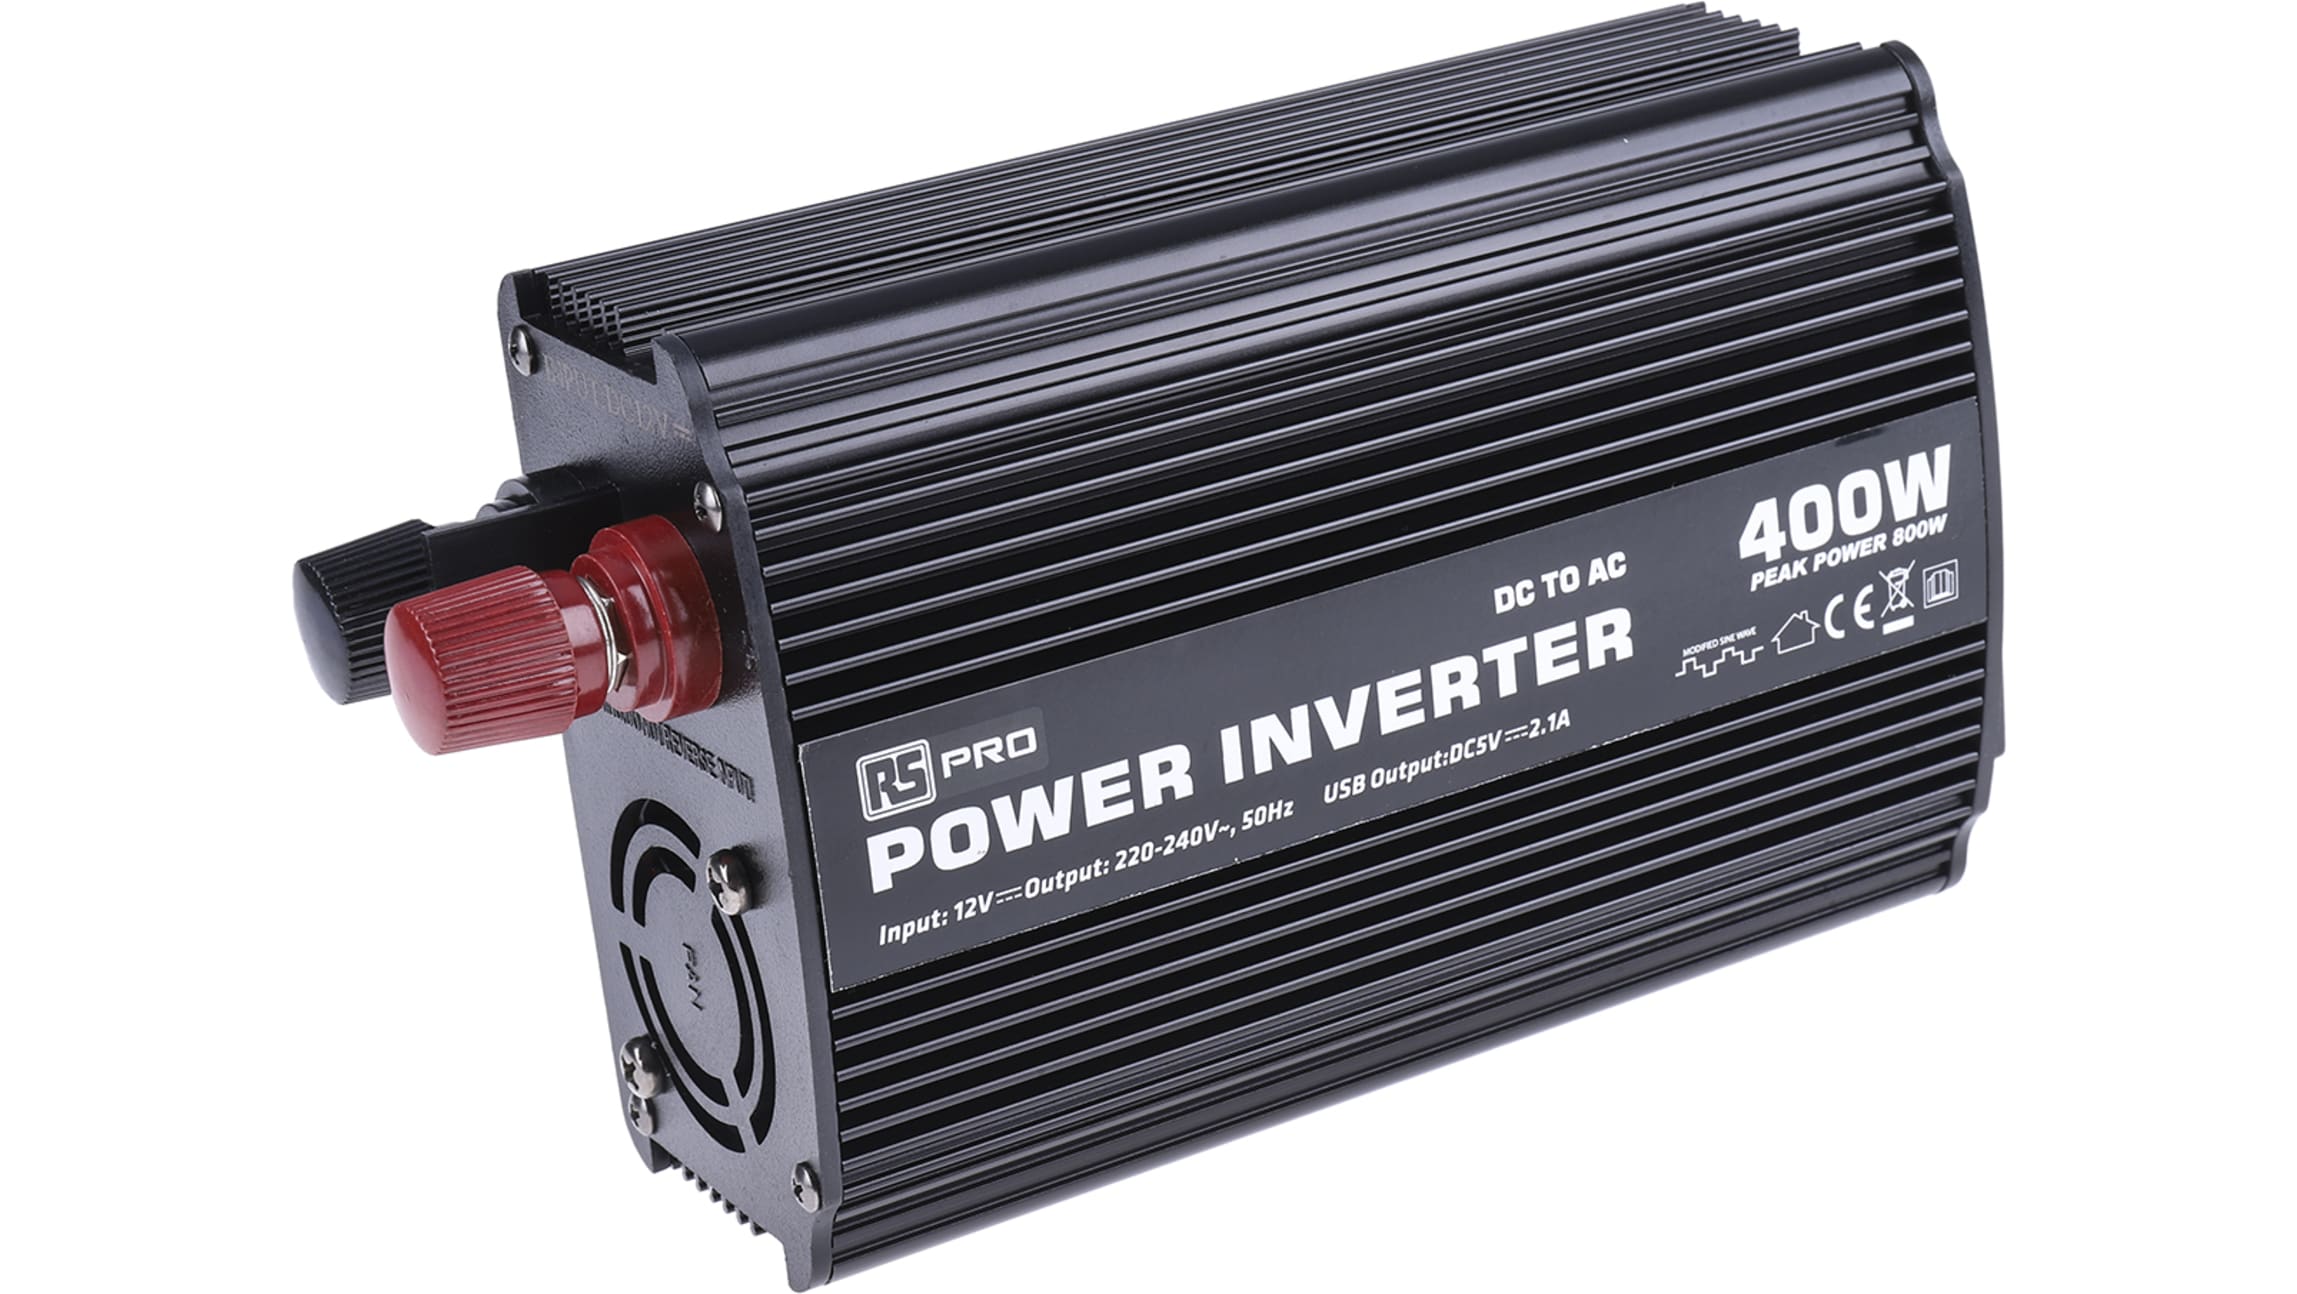 RS PRO Spannungswandler, 12V dc / 230V ac 400W Modifizierte Sinuswelle